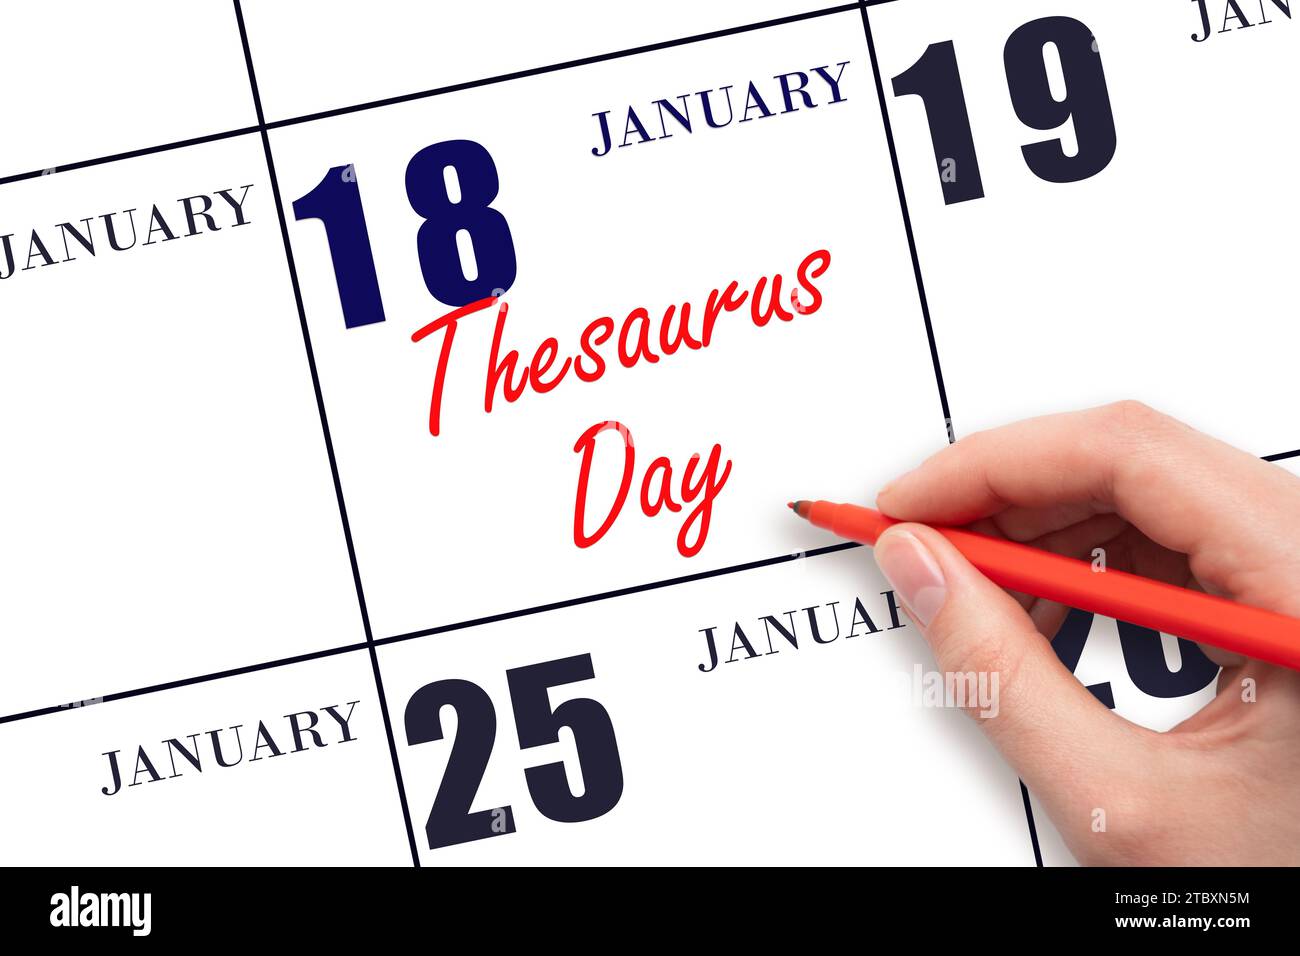 January 18. Hand writing text Thesaurus Day on calendar date. Save the date. Holiday.  Day of the year concept. Stock Photo